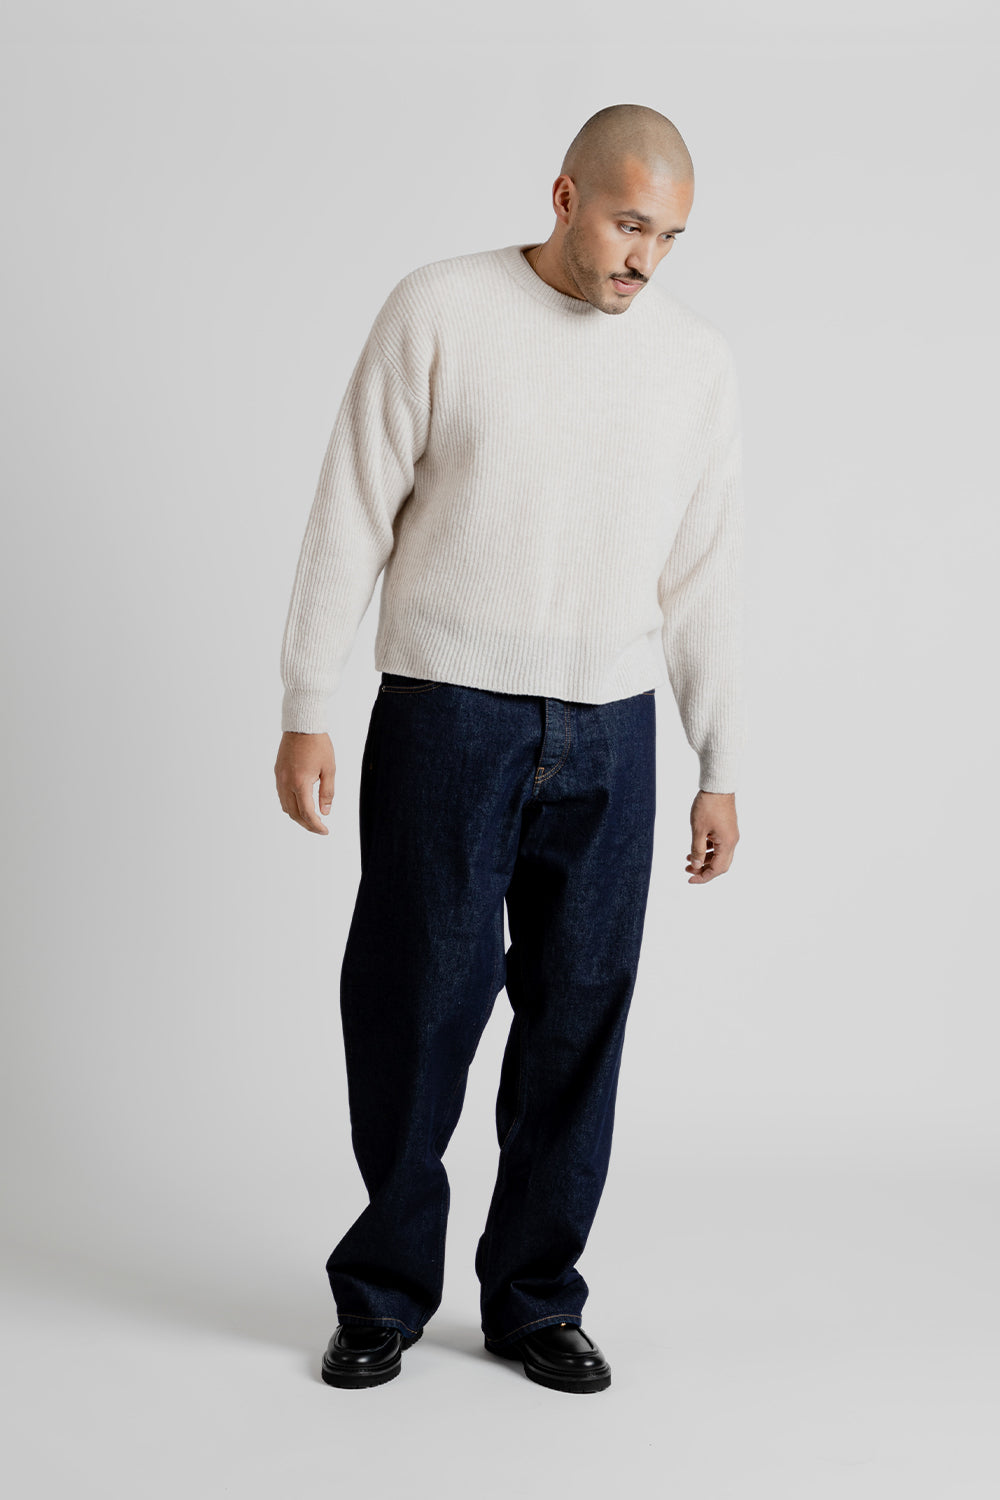 Sunflower Air Rib Knit in Off-White